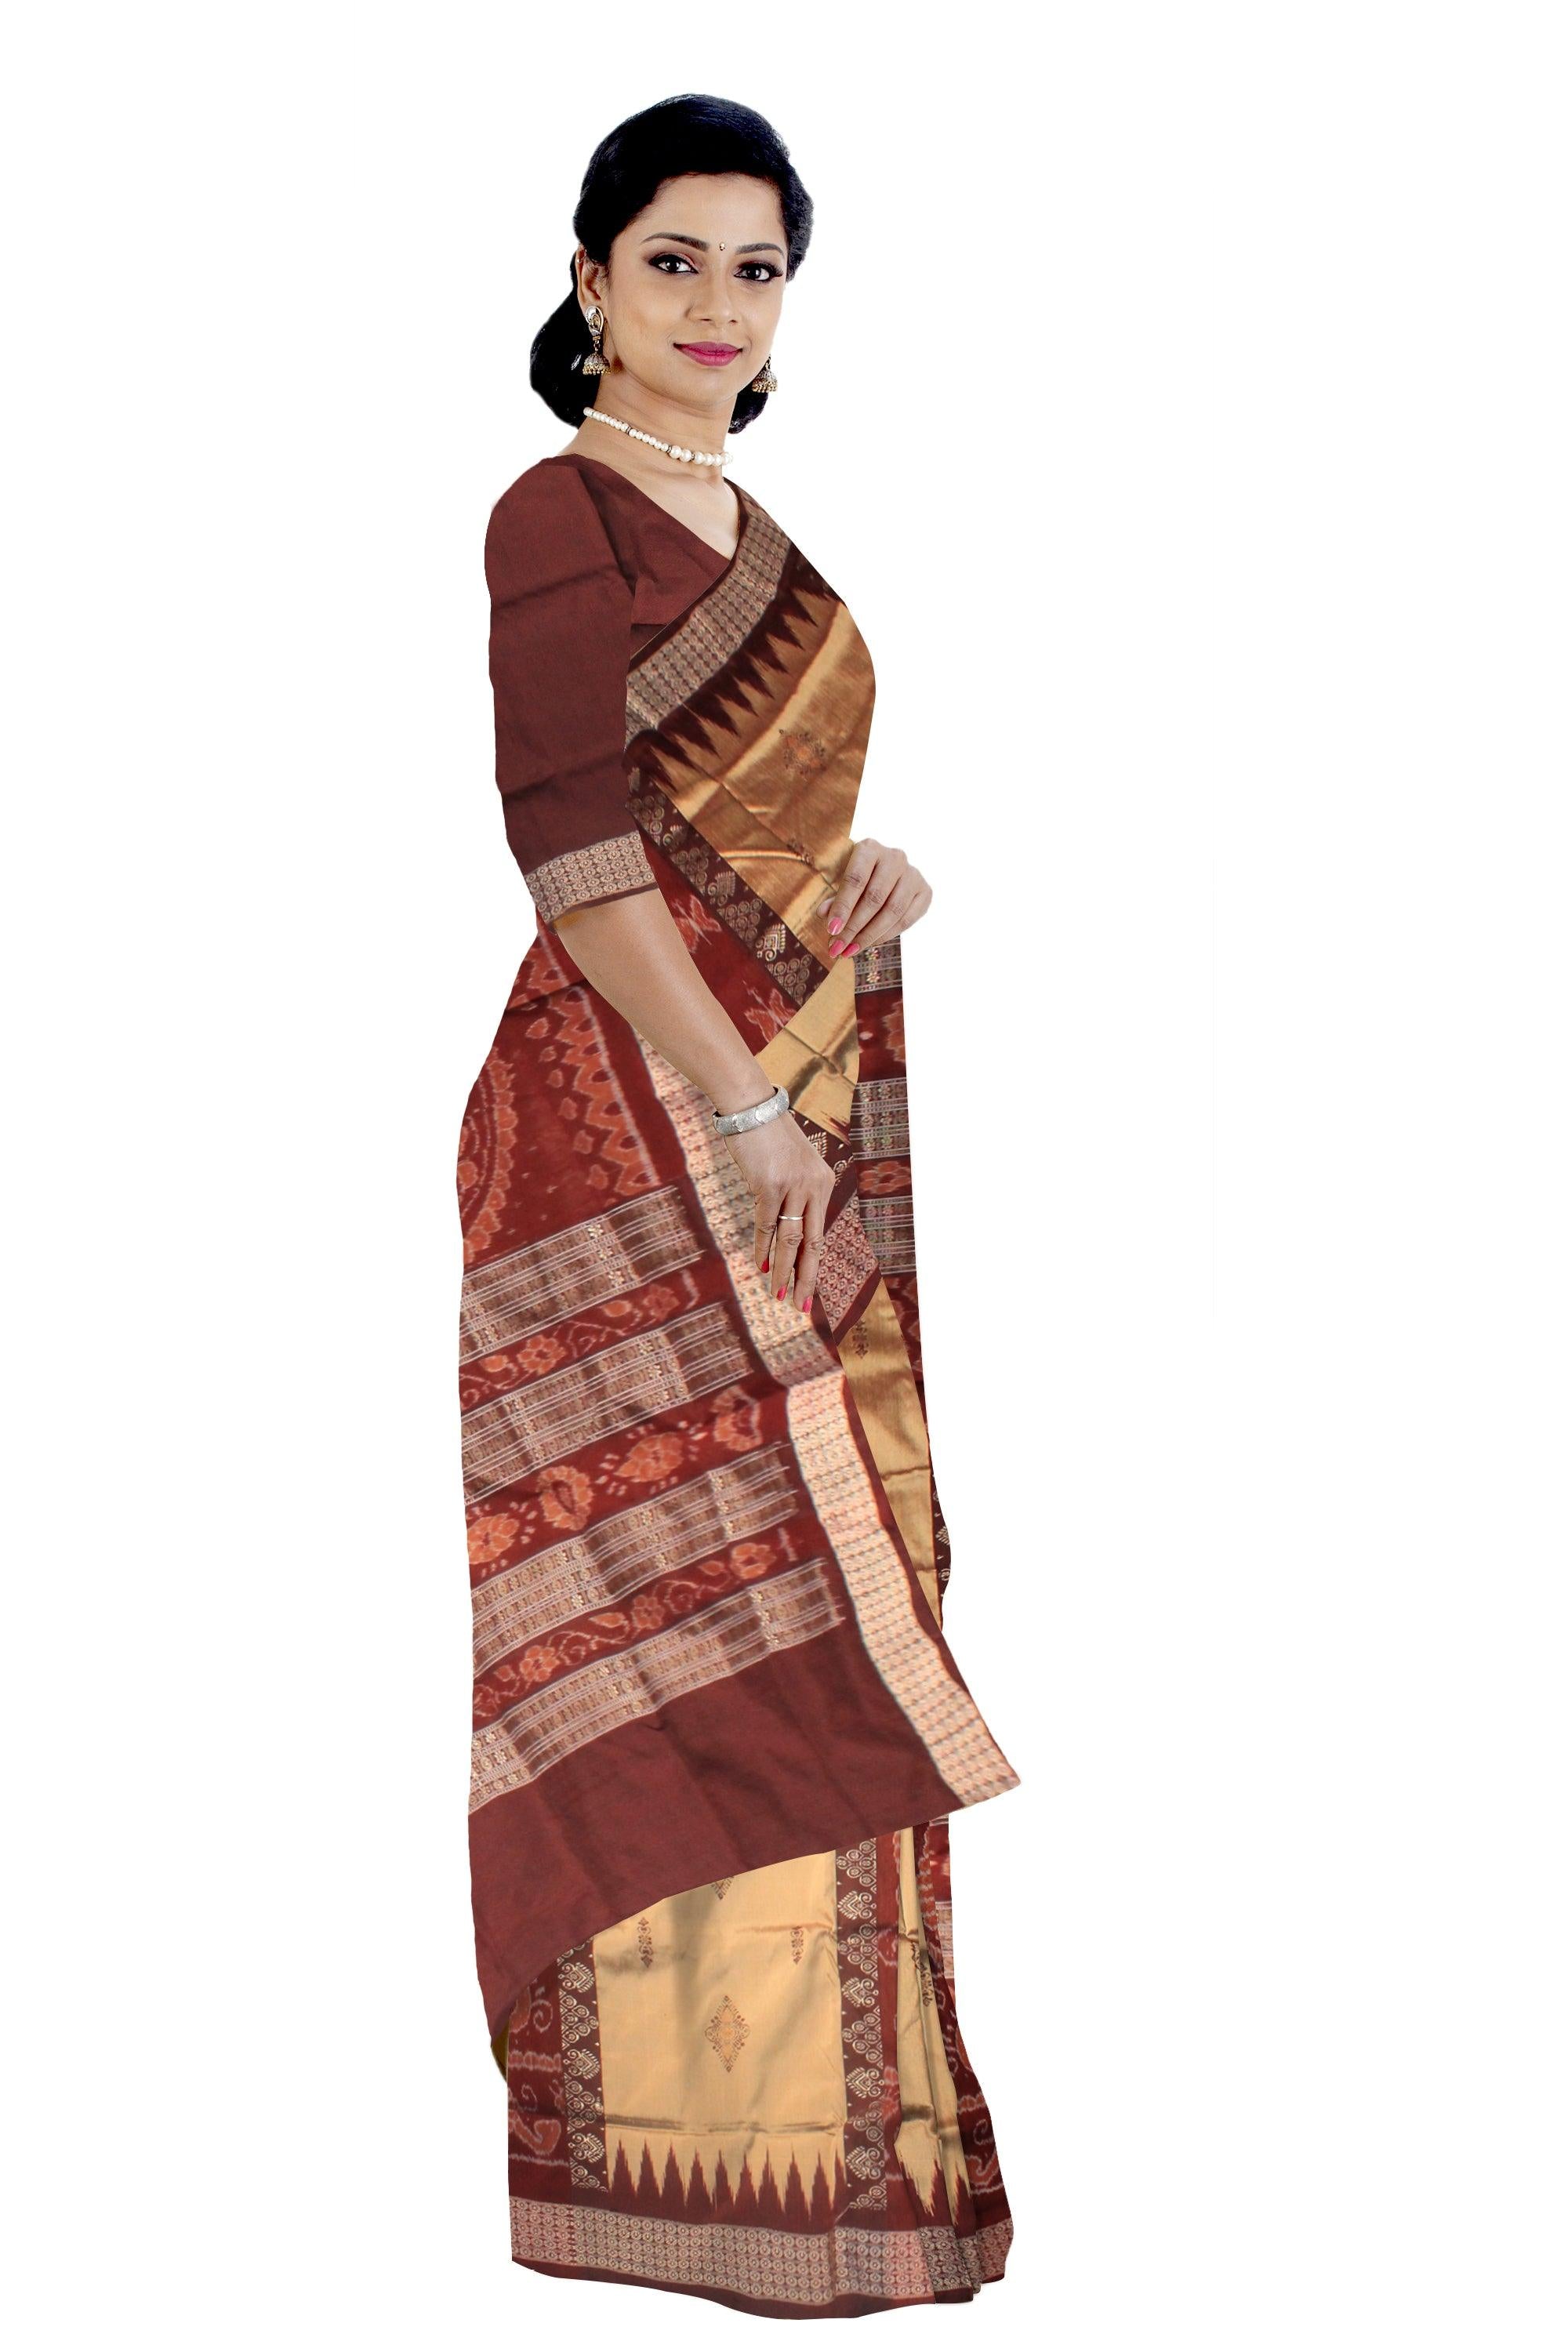 LATEST BUTTERFLY PATTERN DESIGN GOLDEN MAROON COLOR PATA SAREE, WITH BLOUSE PIECE. - Koshali Arts & Crafts Enterprise